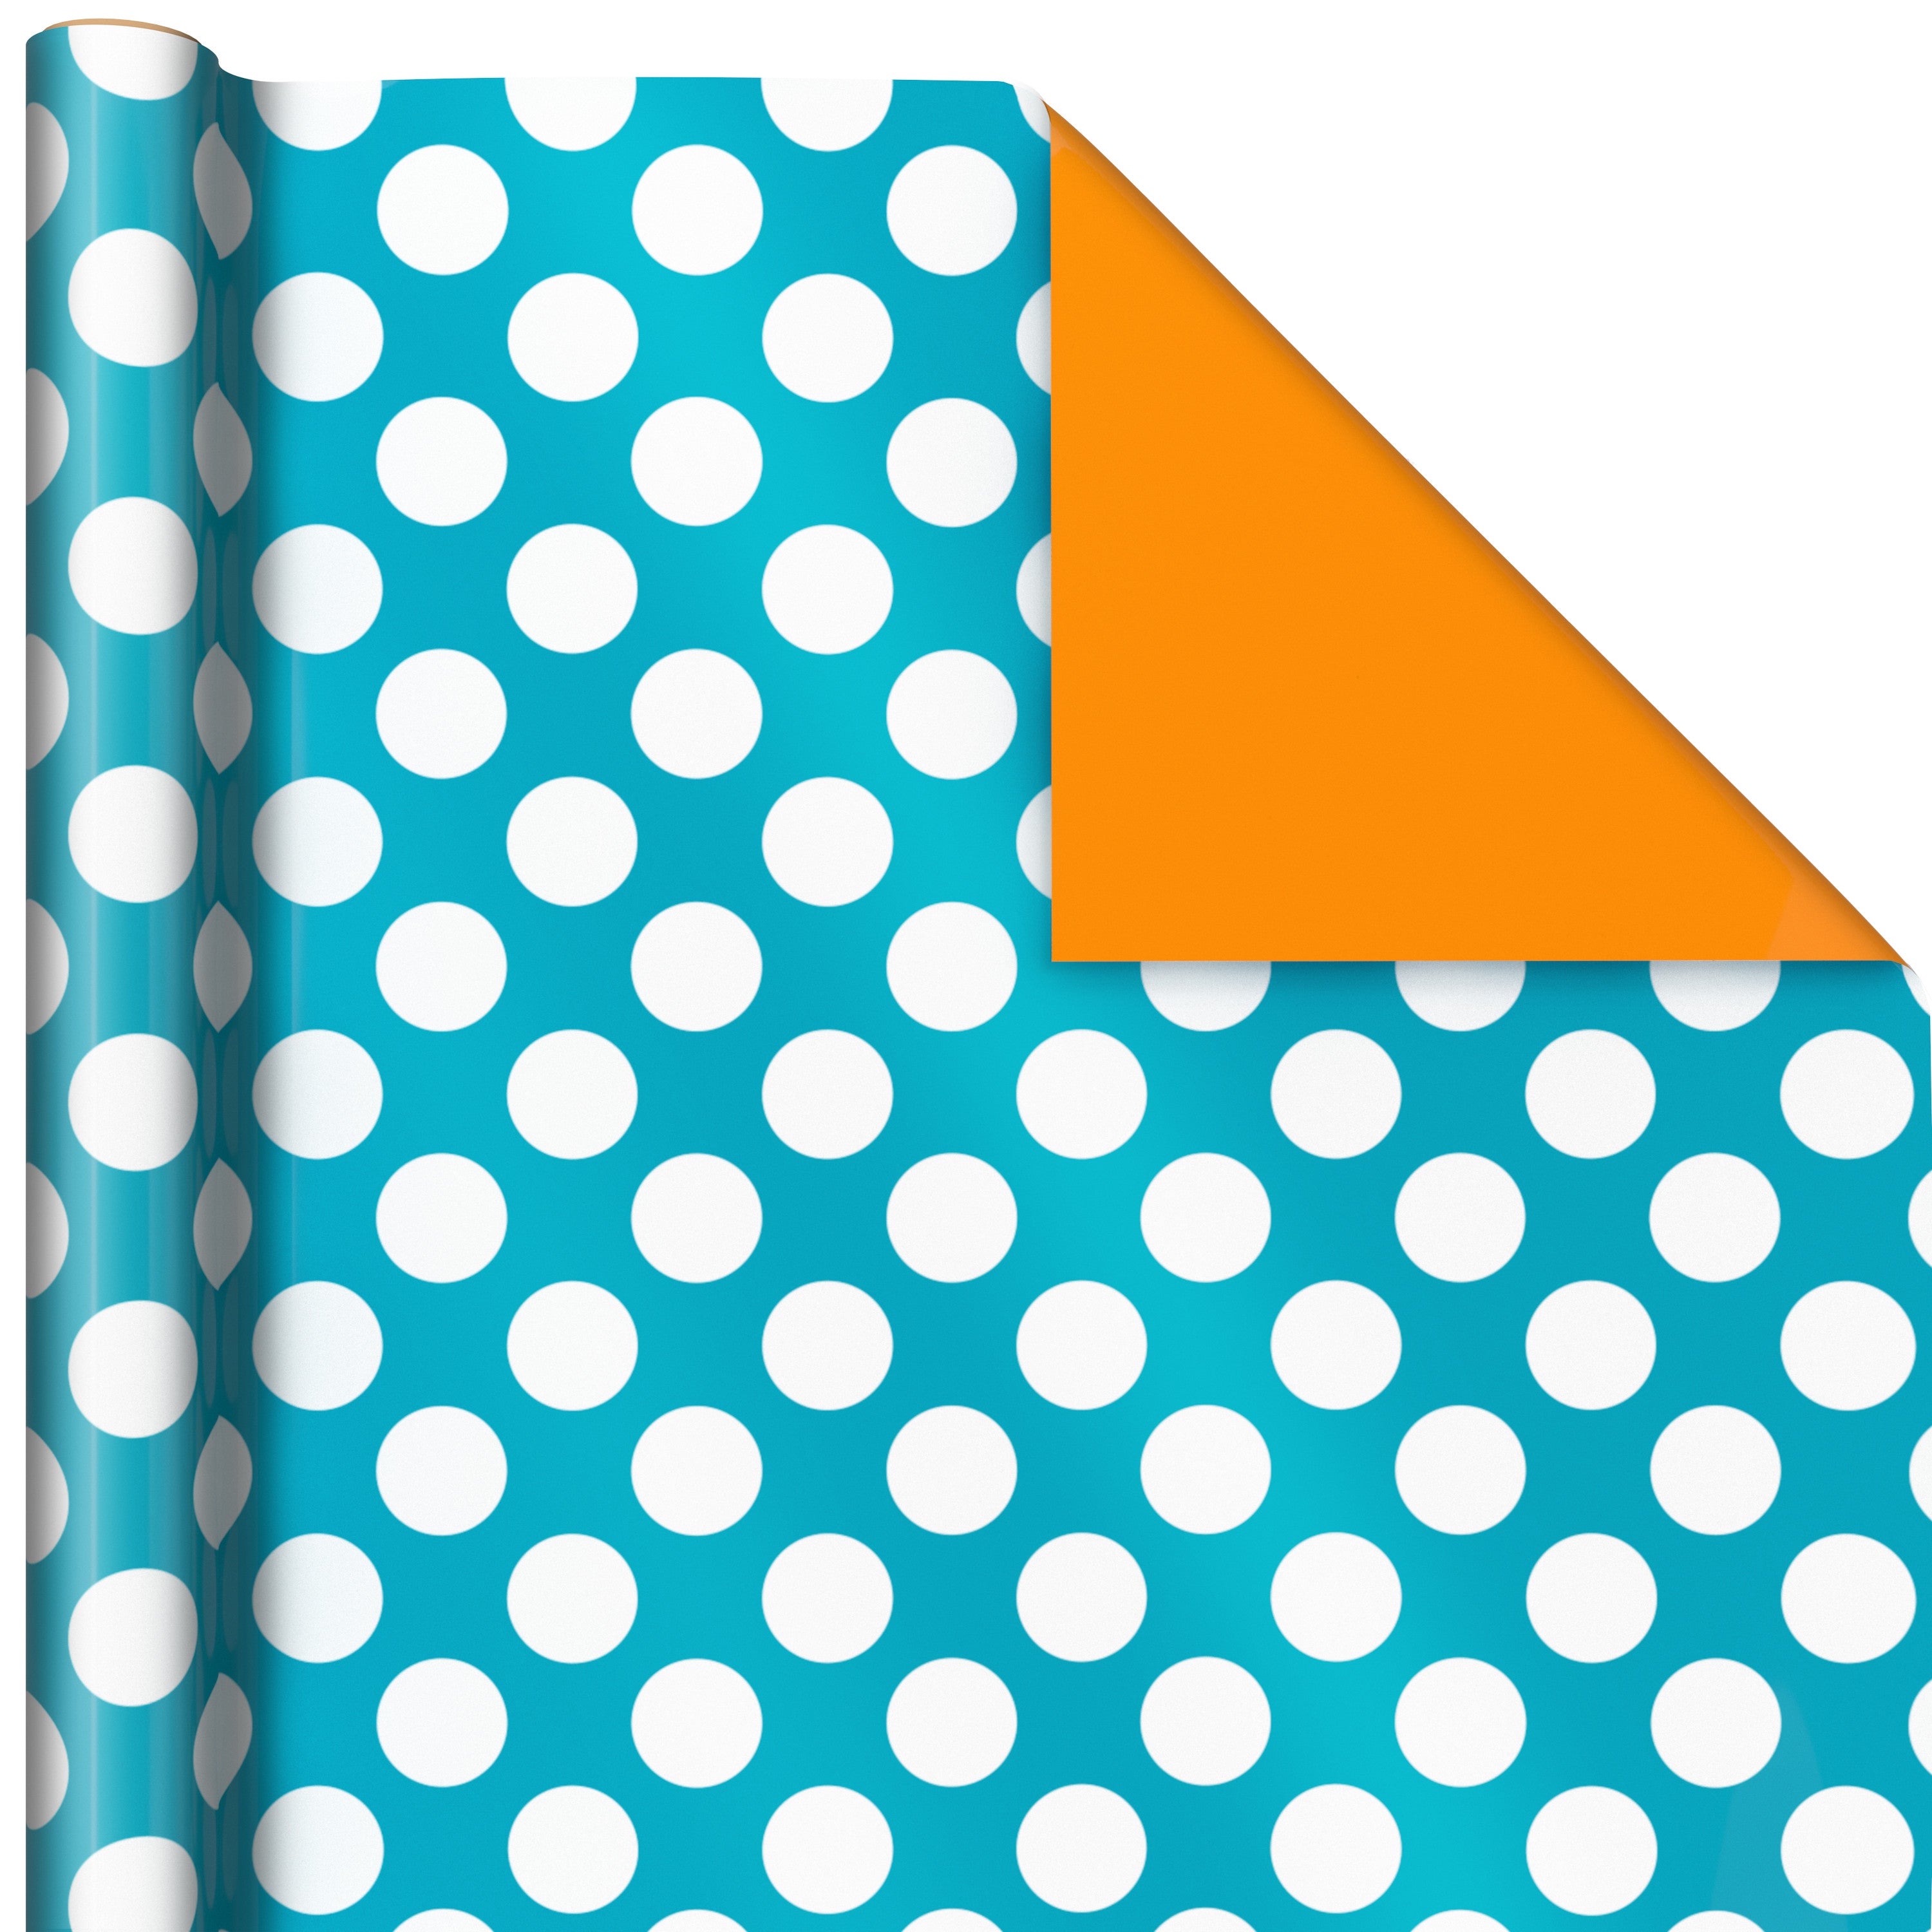 Hallmark All Occasion Reversible Wrapping Paper Bundle - Solids & Dots, Diamonds, Triangles (3 Rolls; 75 sq. ft. ttl) Yellow, Orange, Blue, Black and White